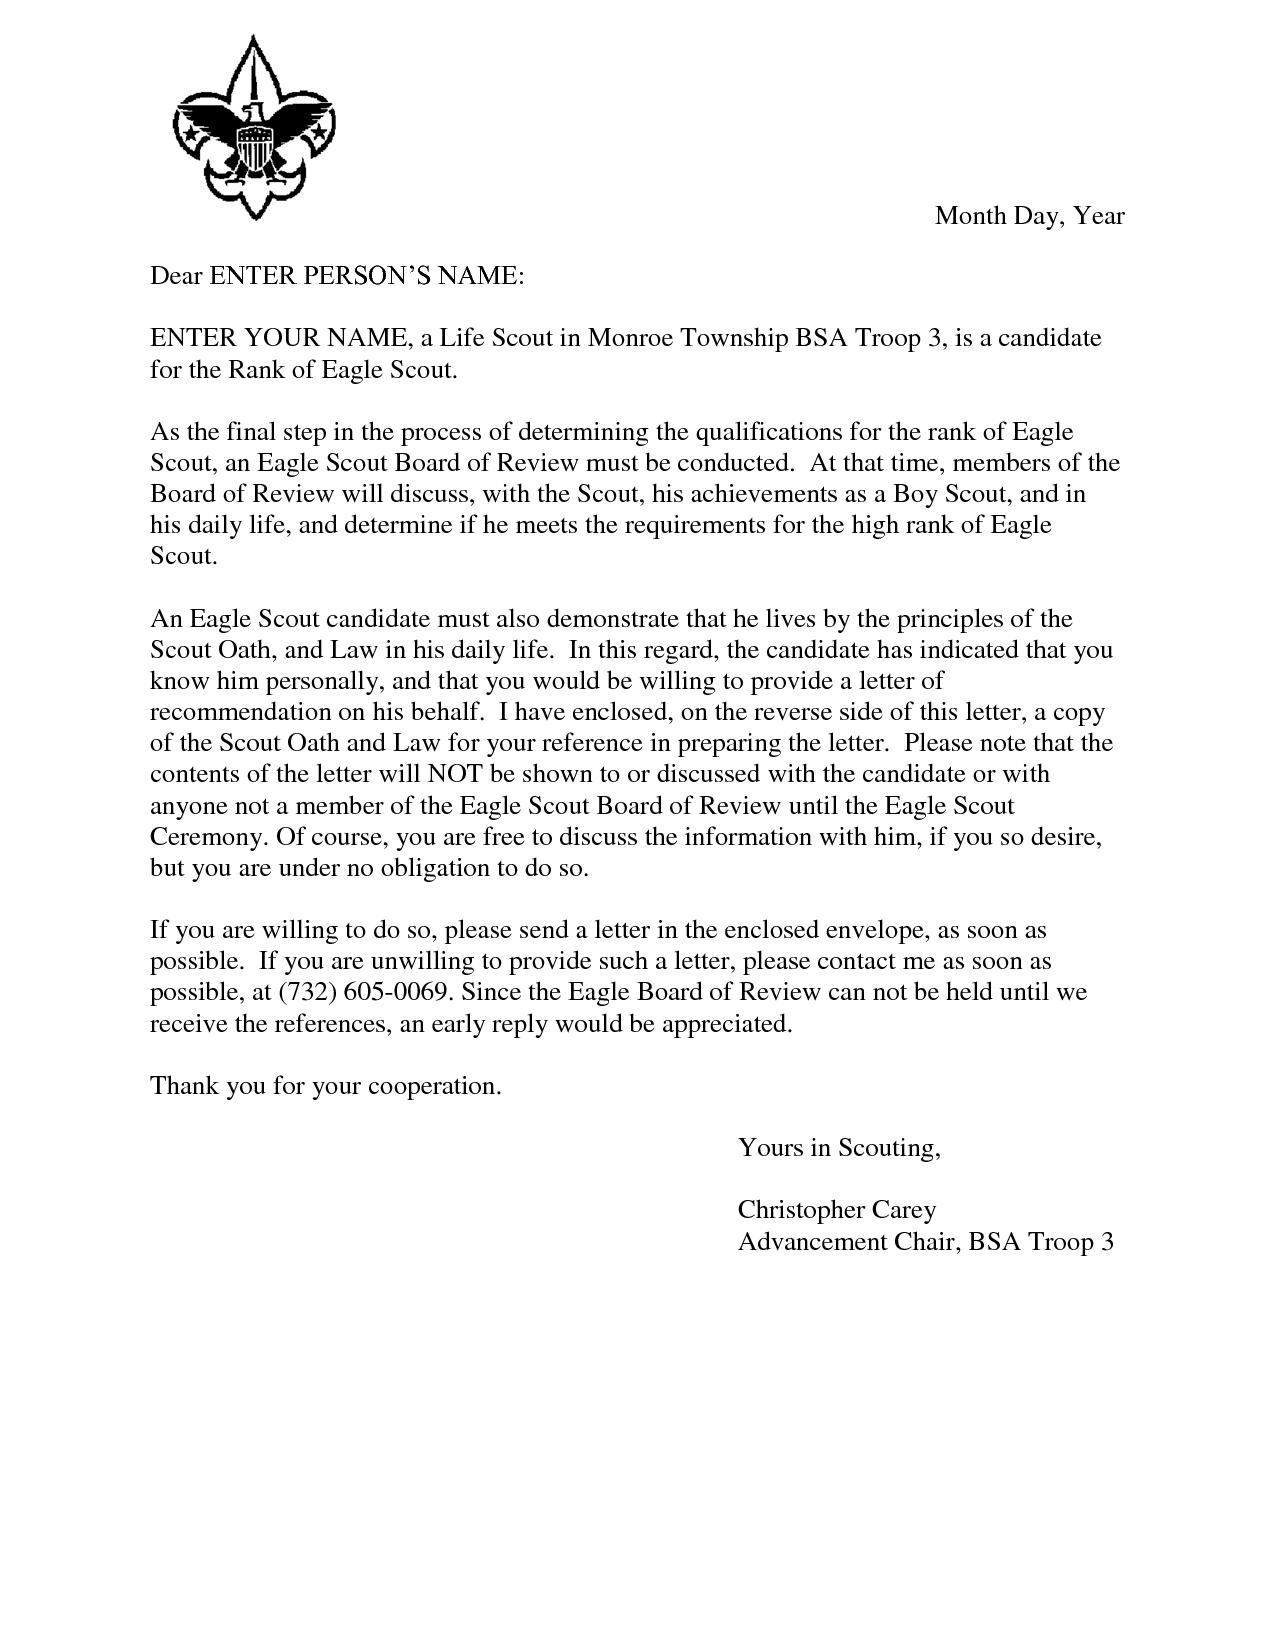 Reference Letter Template for Student - What Should Be In An Eagle Scout Letter Of Re Mendation Acur